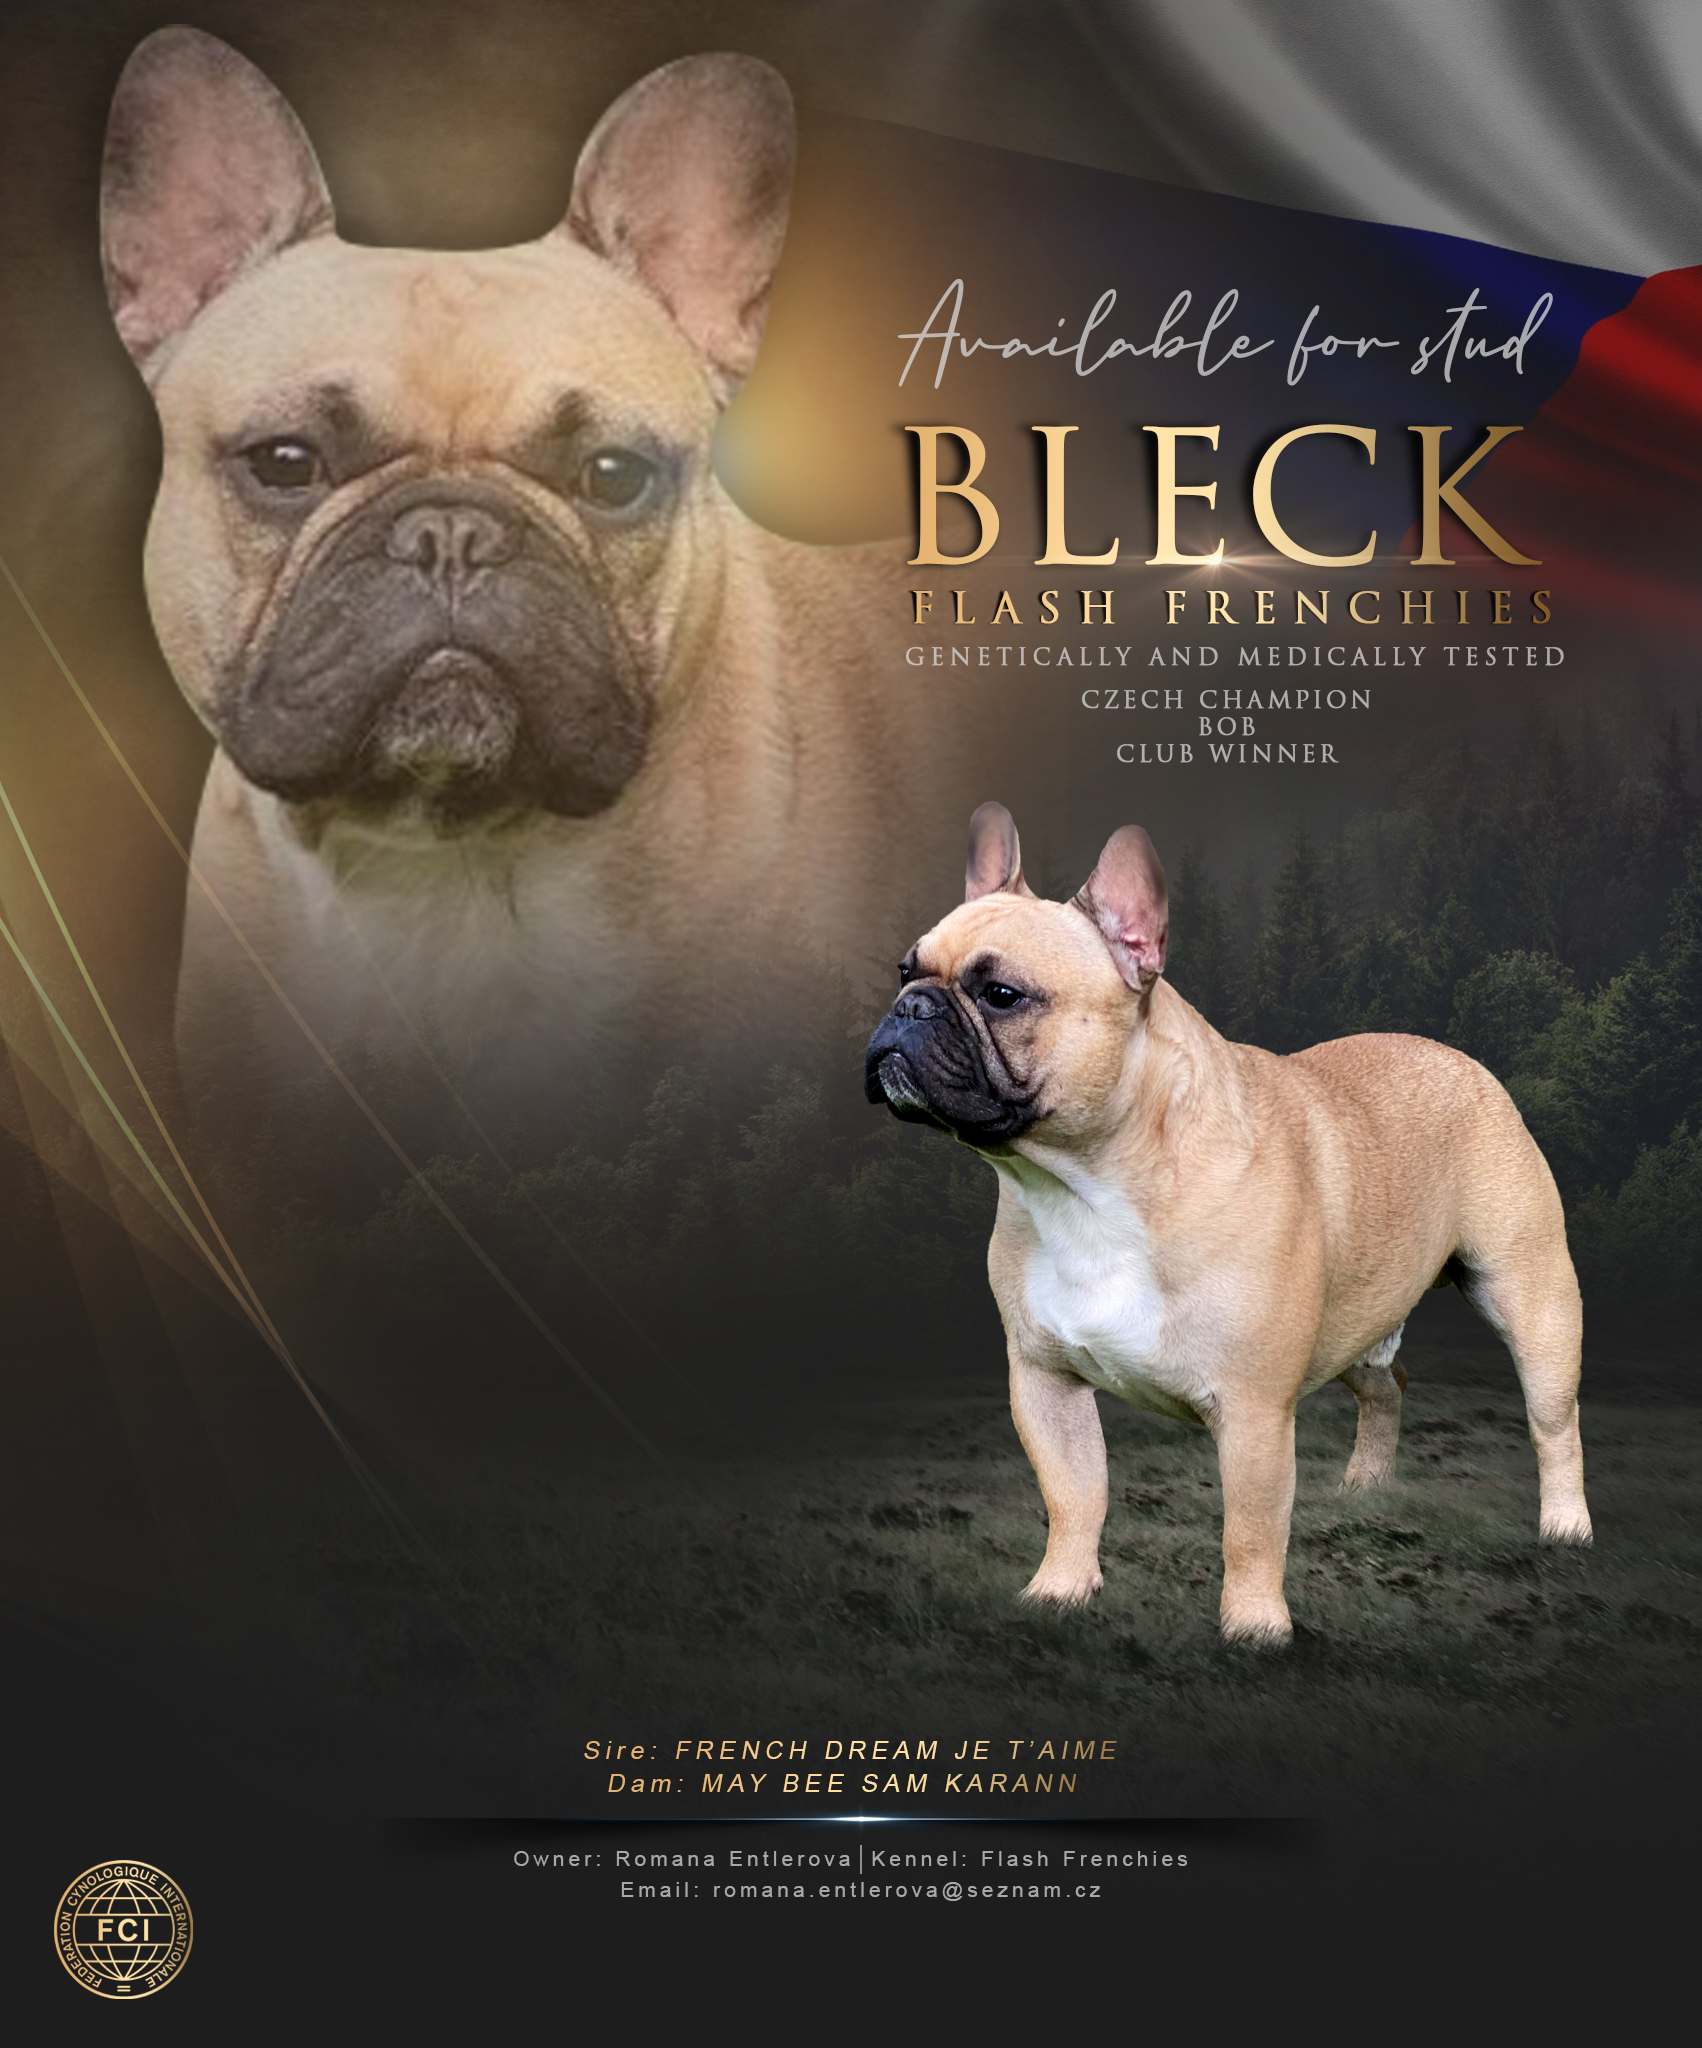 Bleck Flash Frenchies